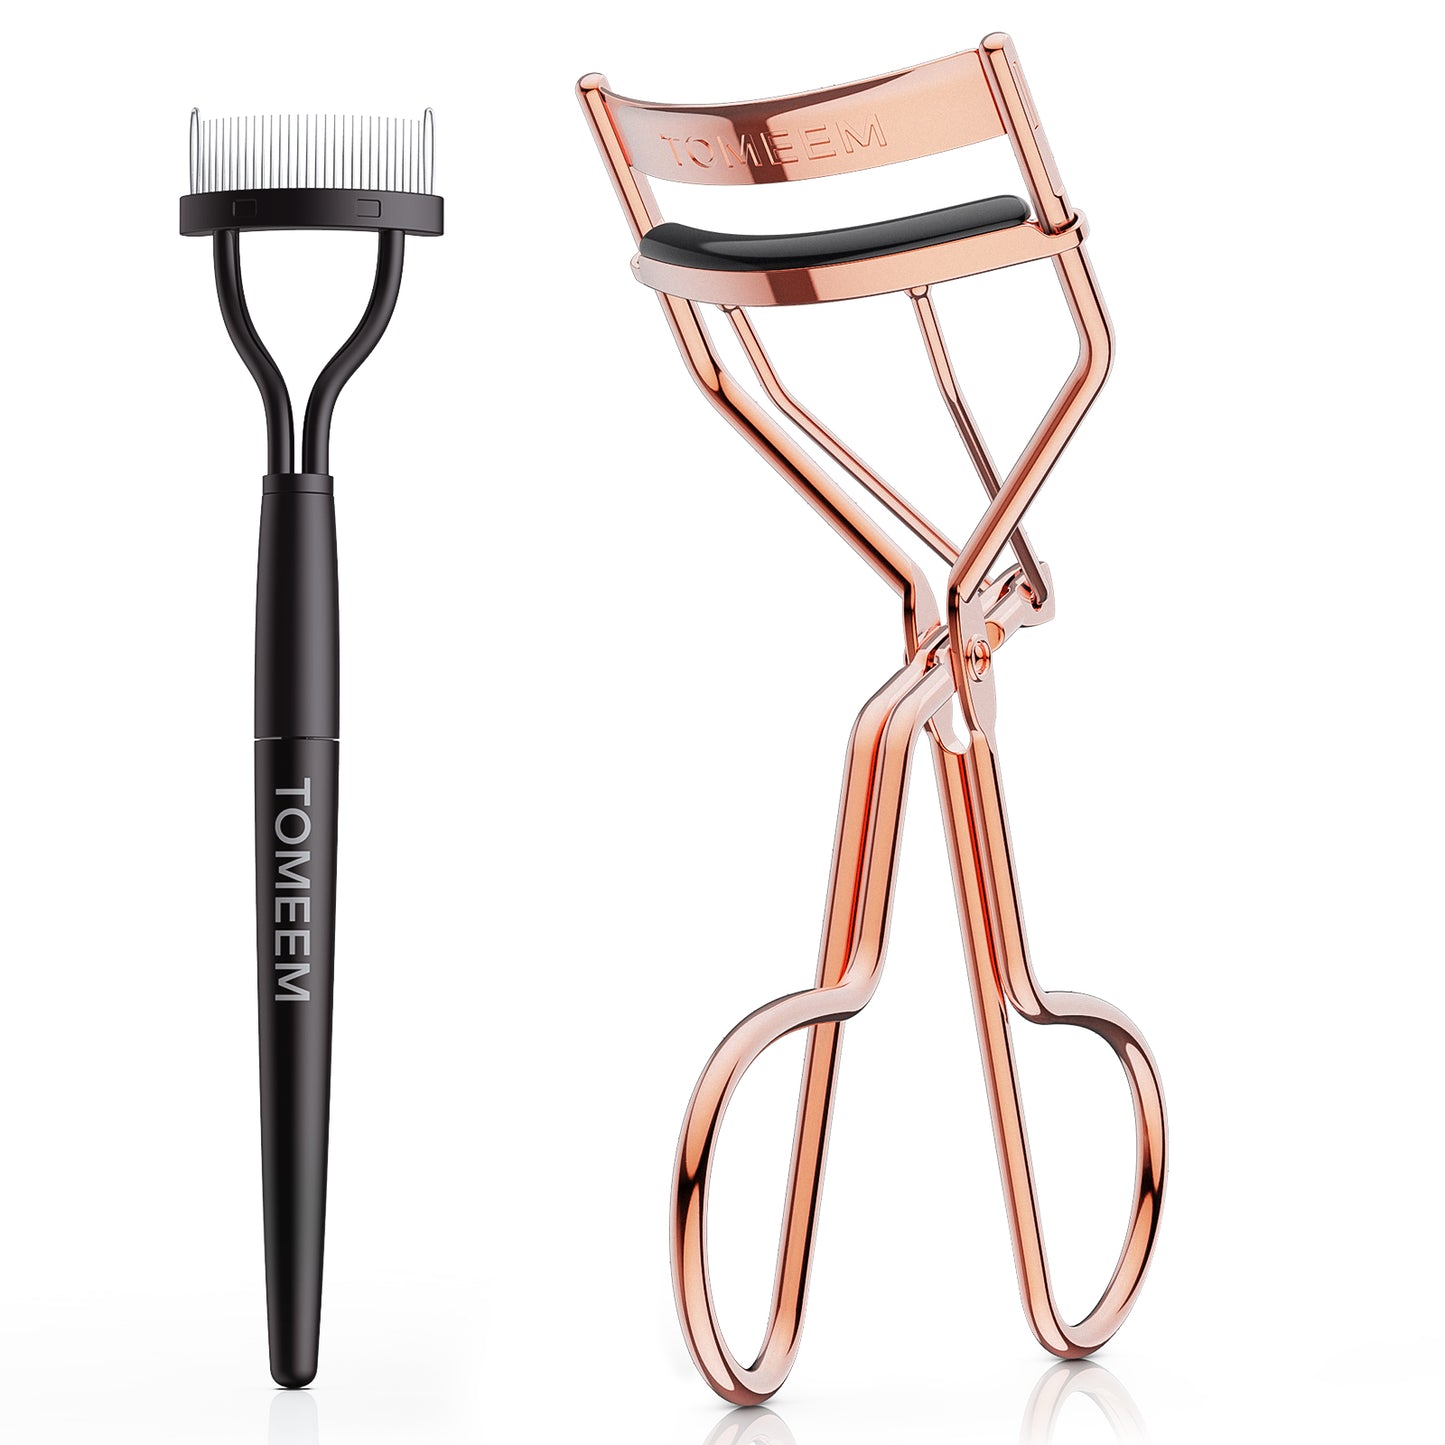 Eyelash Curler with Comb, TOMEEM Professional Volumizing Lash Lift Kit Lash Curler with Refill Pads for Home & Travel Uses, Rose Gold